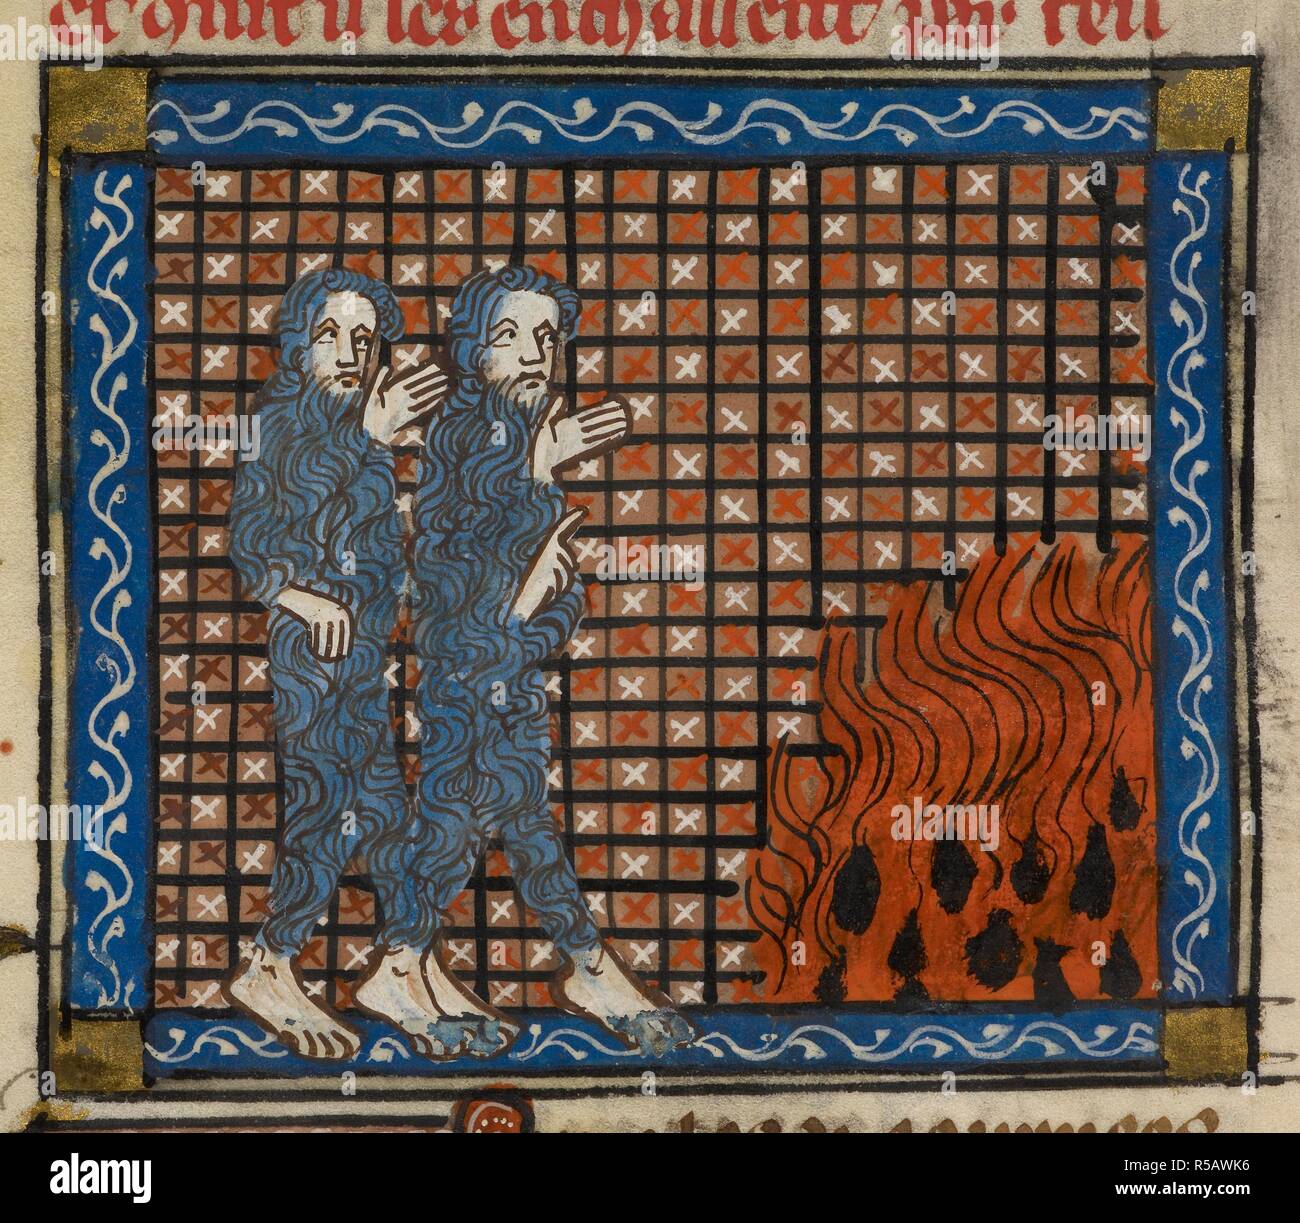 Illustration of two men and a fire. Historia de proeliis, or, La vraie ystoire dou bon roi Alixandre. Historia de proeliis, translated in French as La vraie ystoire dou bon roi Alixandre, and other romances. 2nd quarter of the 14th century, after 1333. Source: Royal 19 D. I f.98v (det). Language: French. Stock Photo